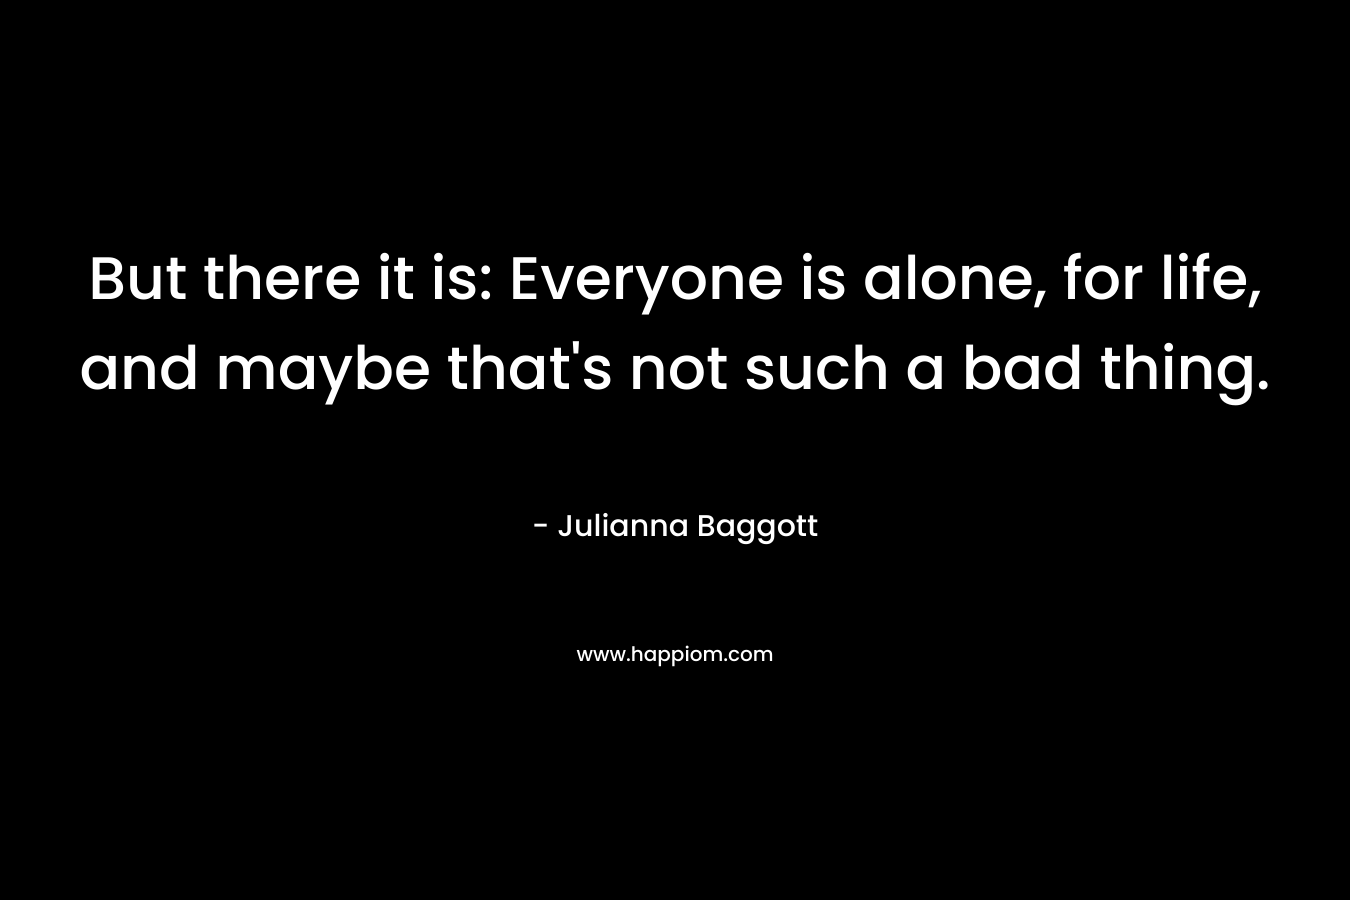 But there it is: Everyone is alone, for life, and maybe that's not such a bad thing.